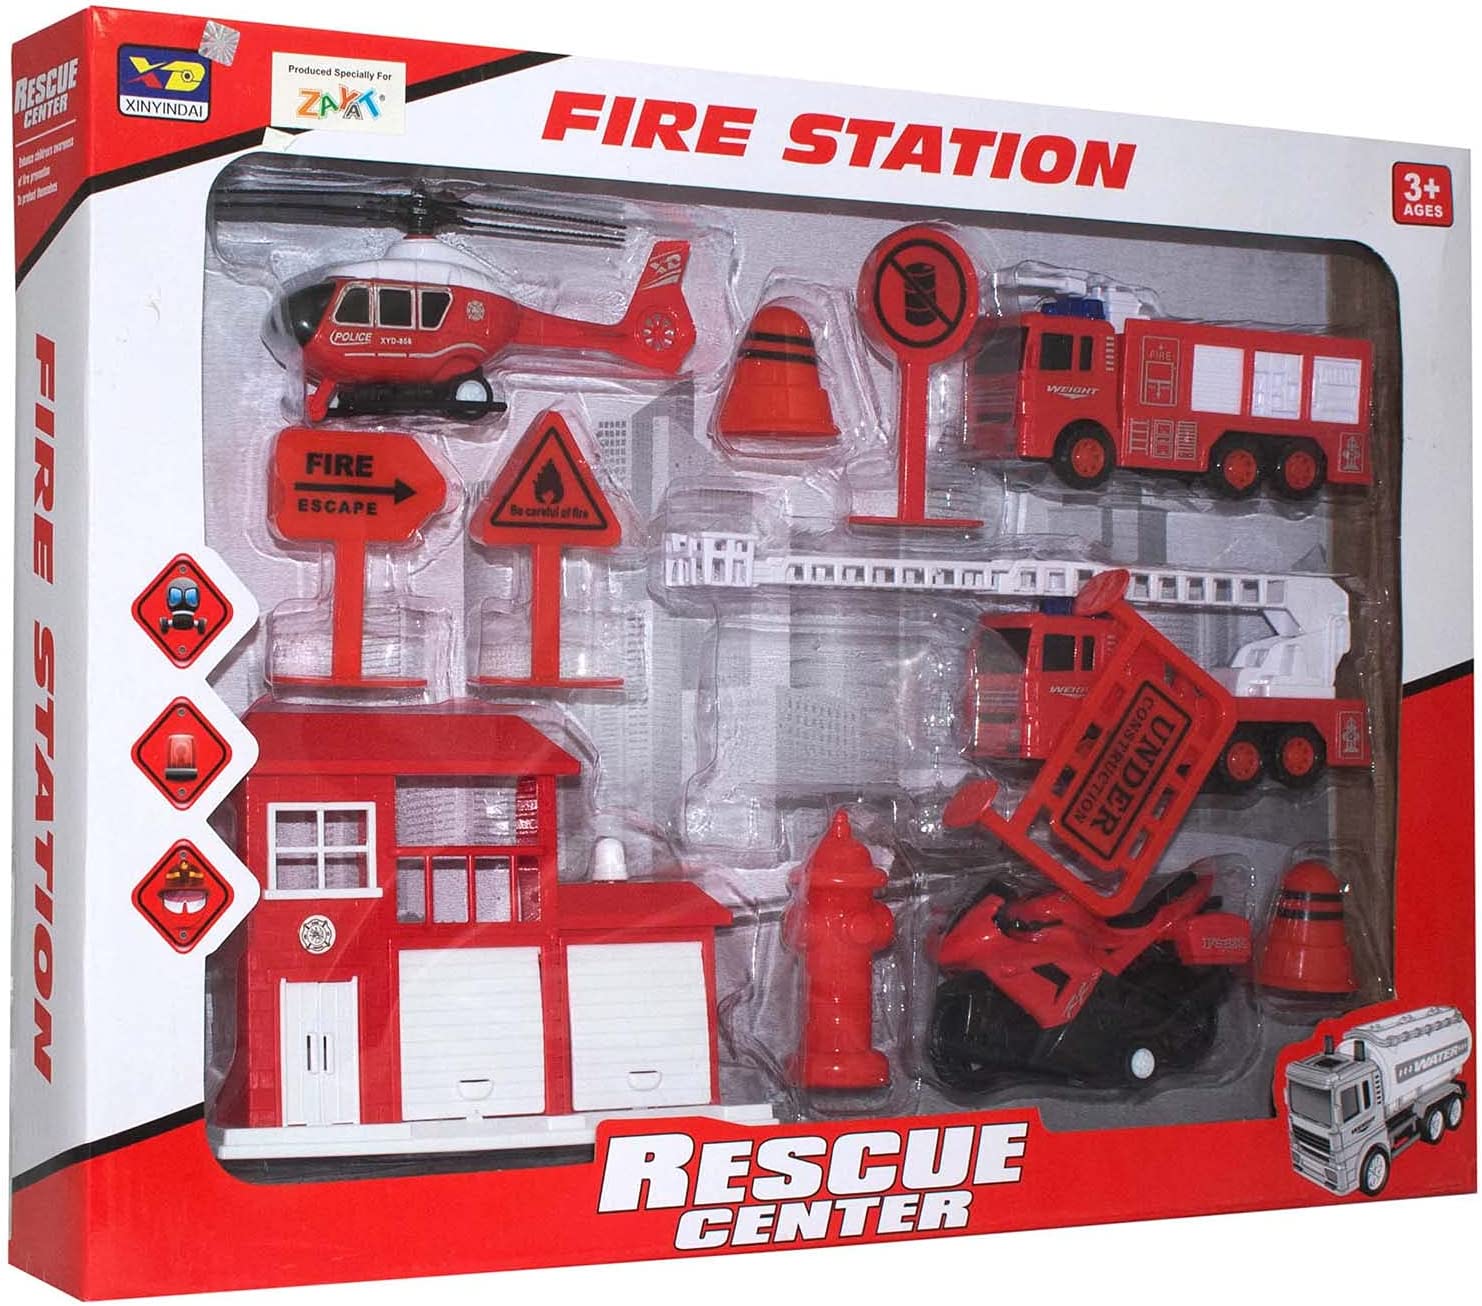 Rescue Center Fire Station Play Set